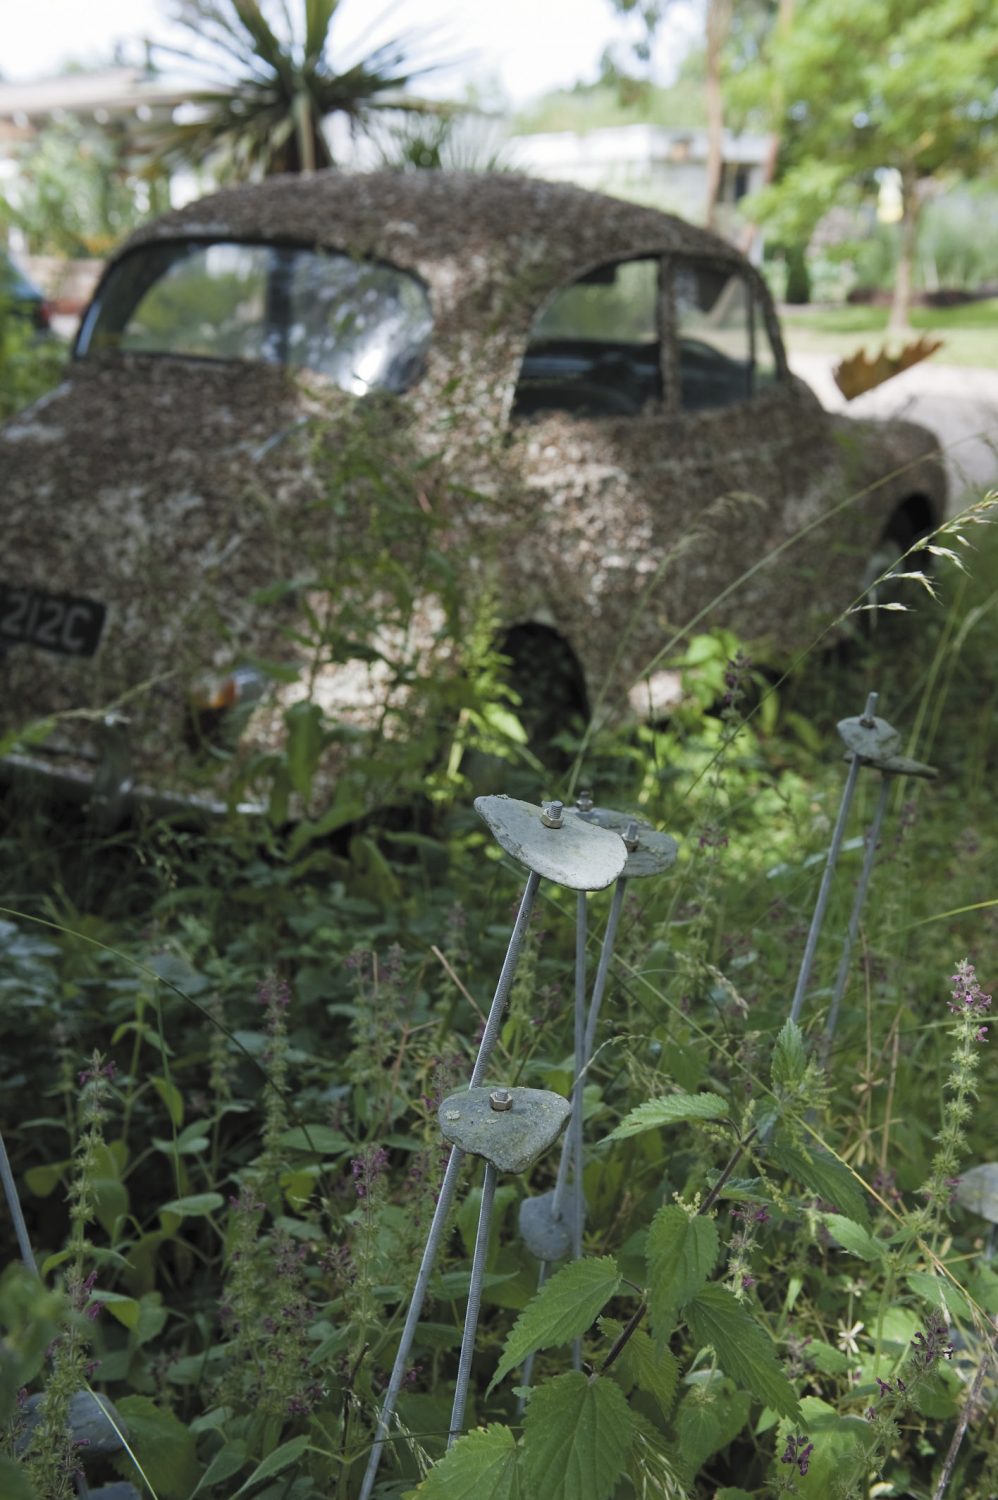 Dozing in the shade amid wild flowers and ornamental rhubarb is a 1960s Morris Minor, pebble-dashed with gravel left over from resurfacing the drive